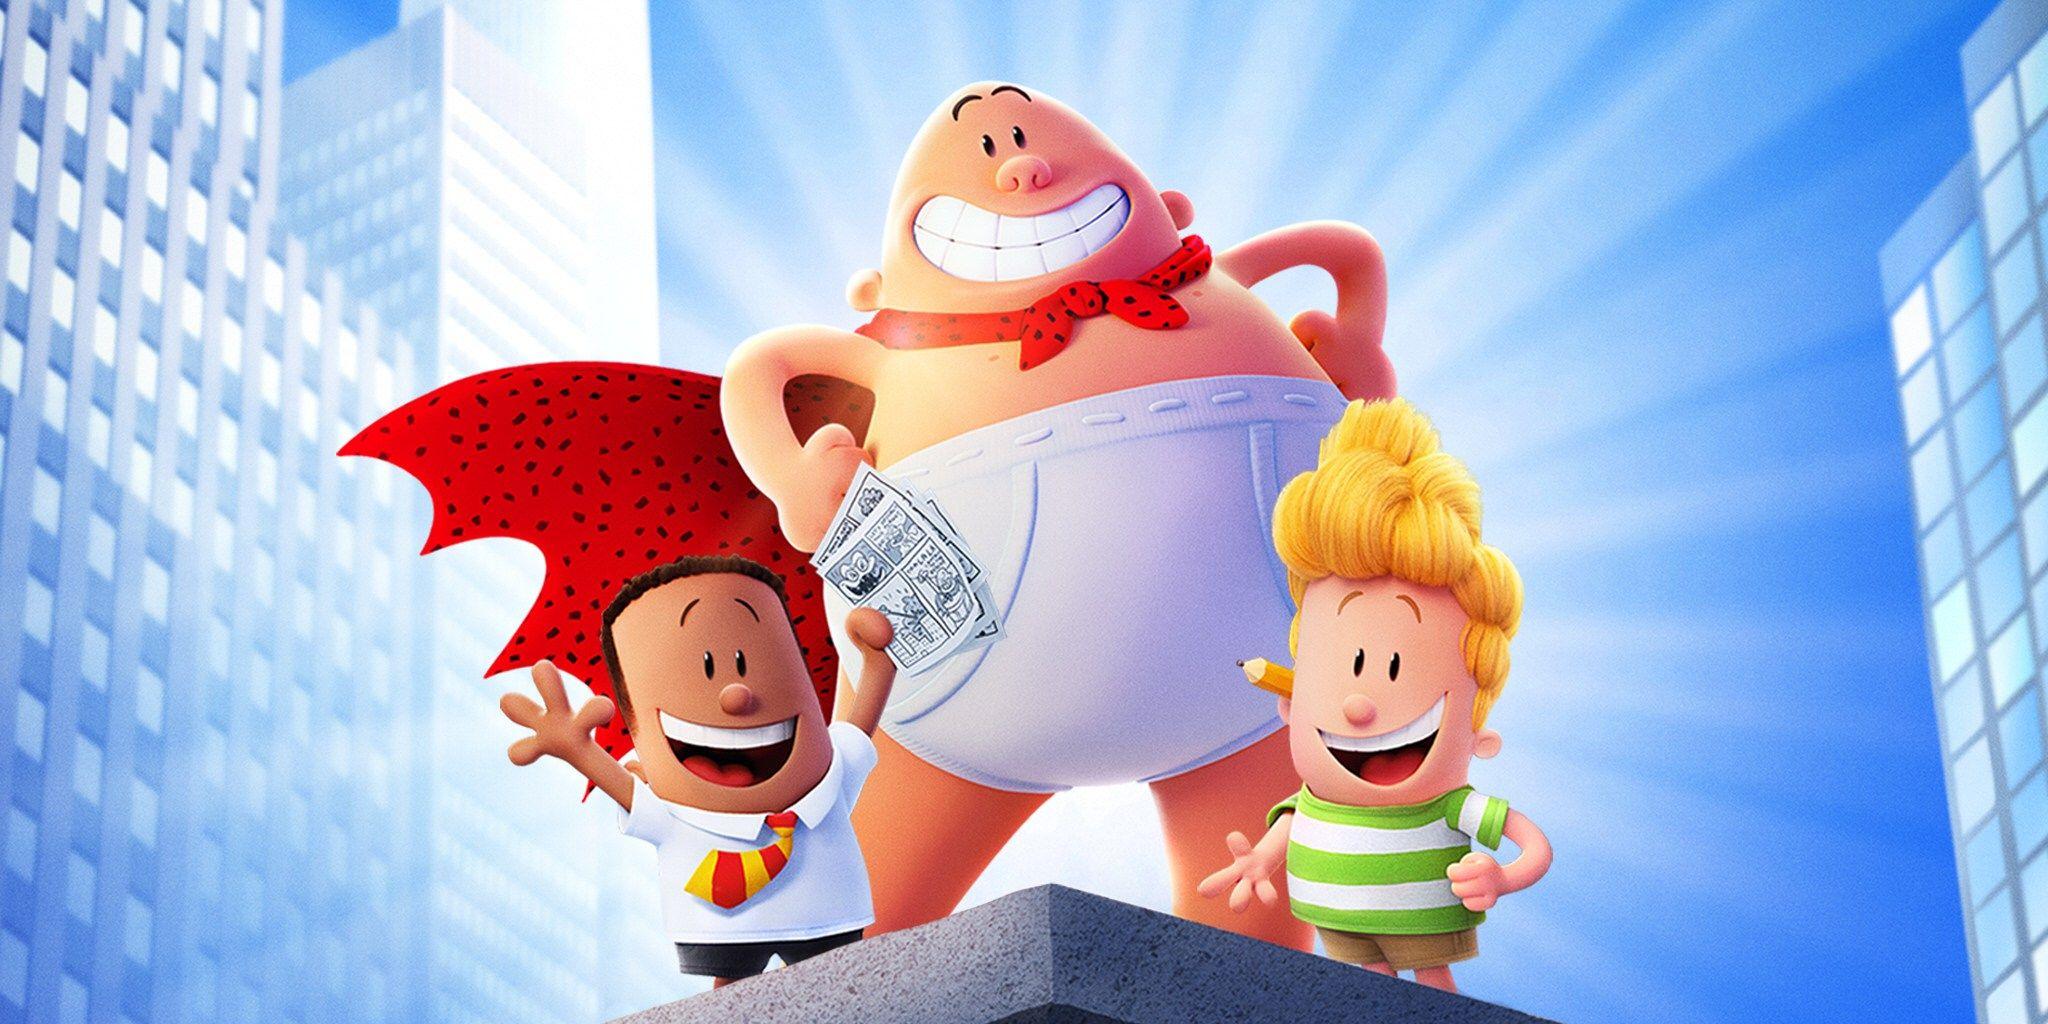 Kids Review: Captain Underpants: The First Epic Movie